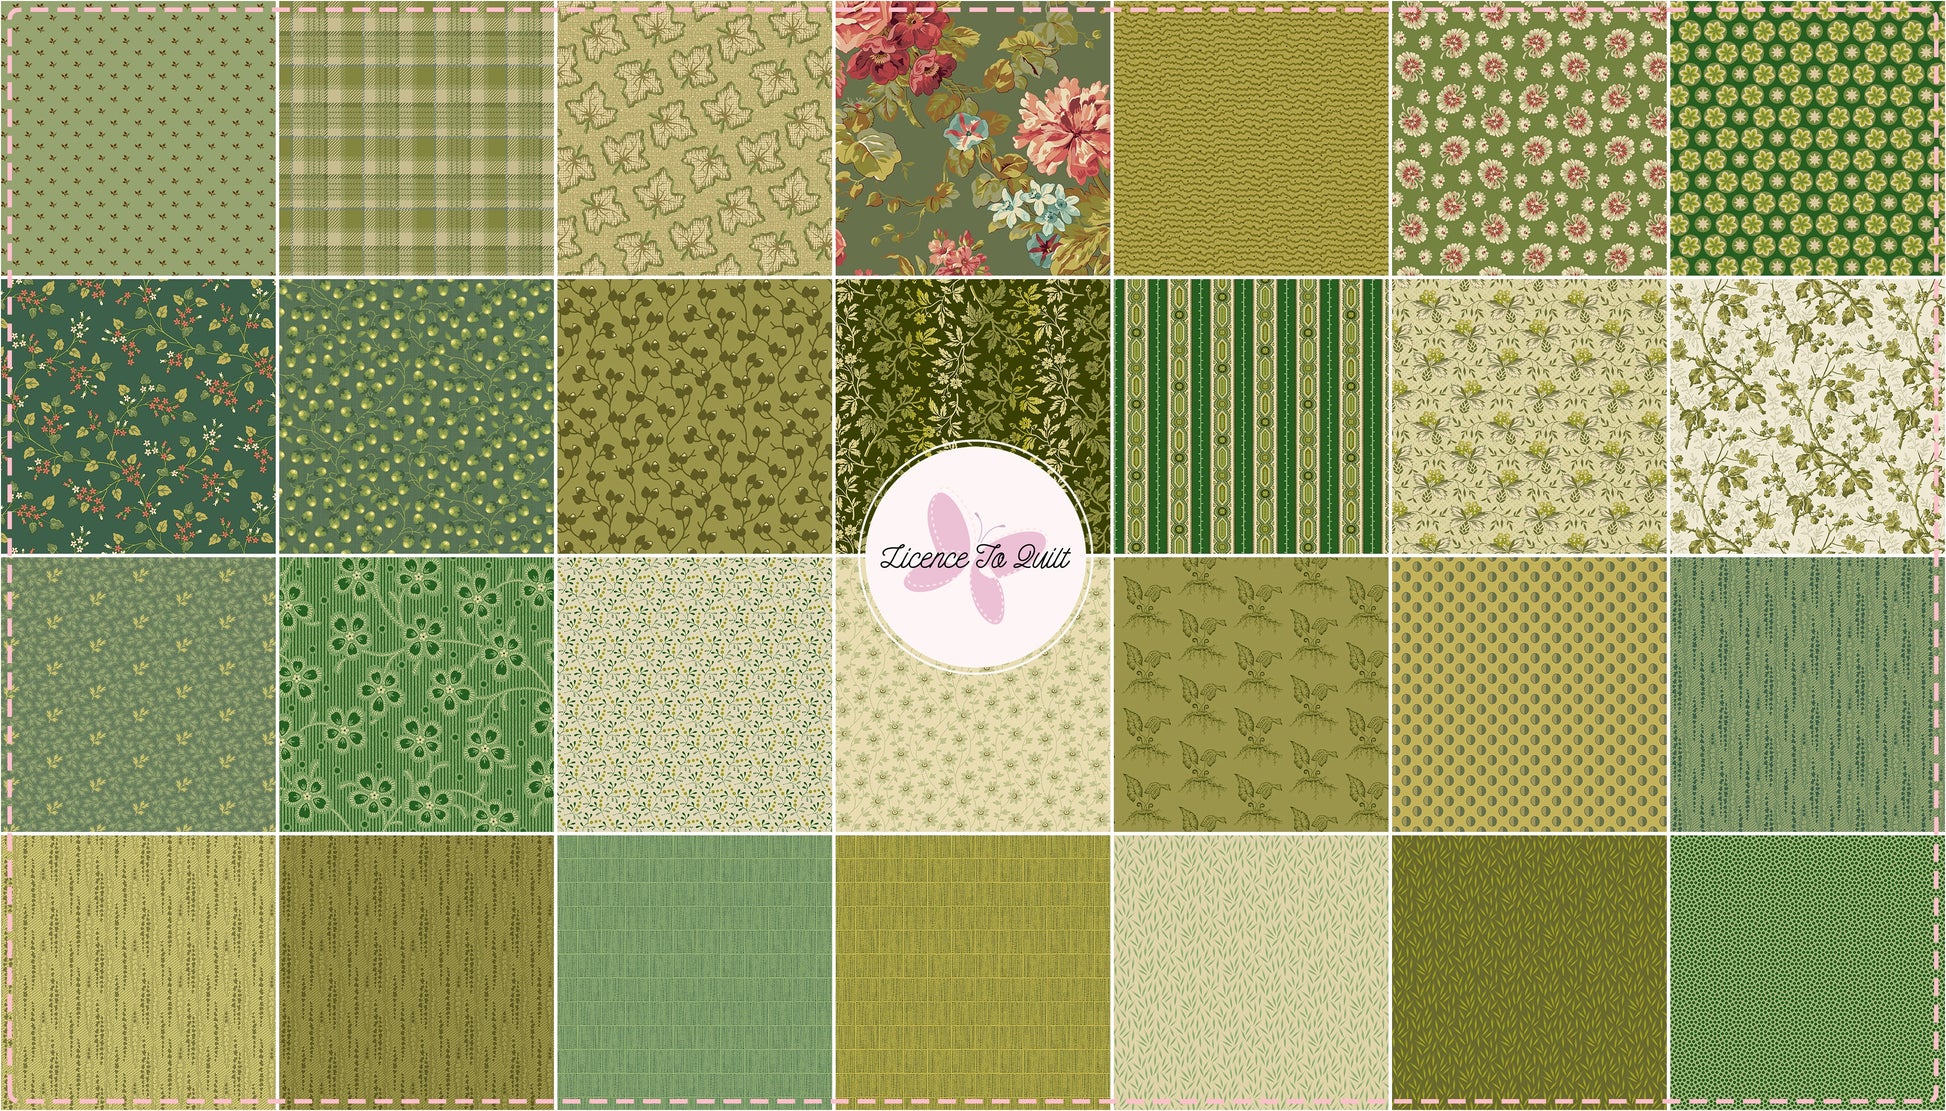 Green Thumb - Mist Gingko - Licence To Quilt